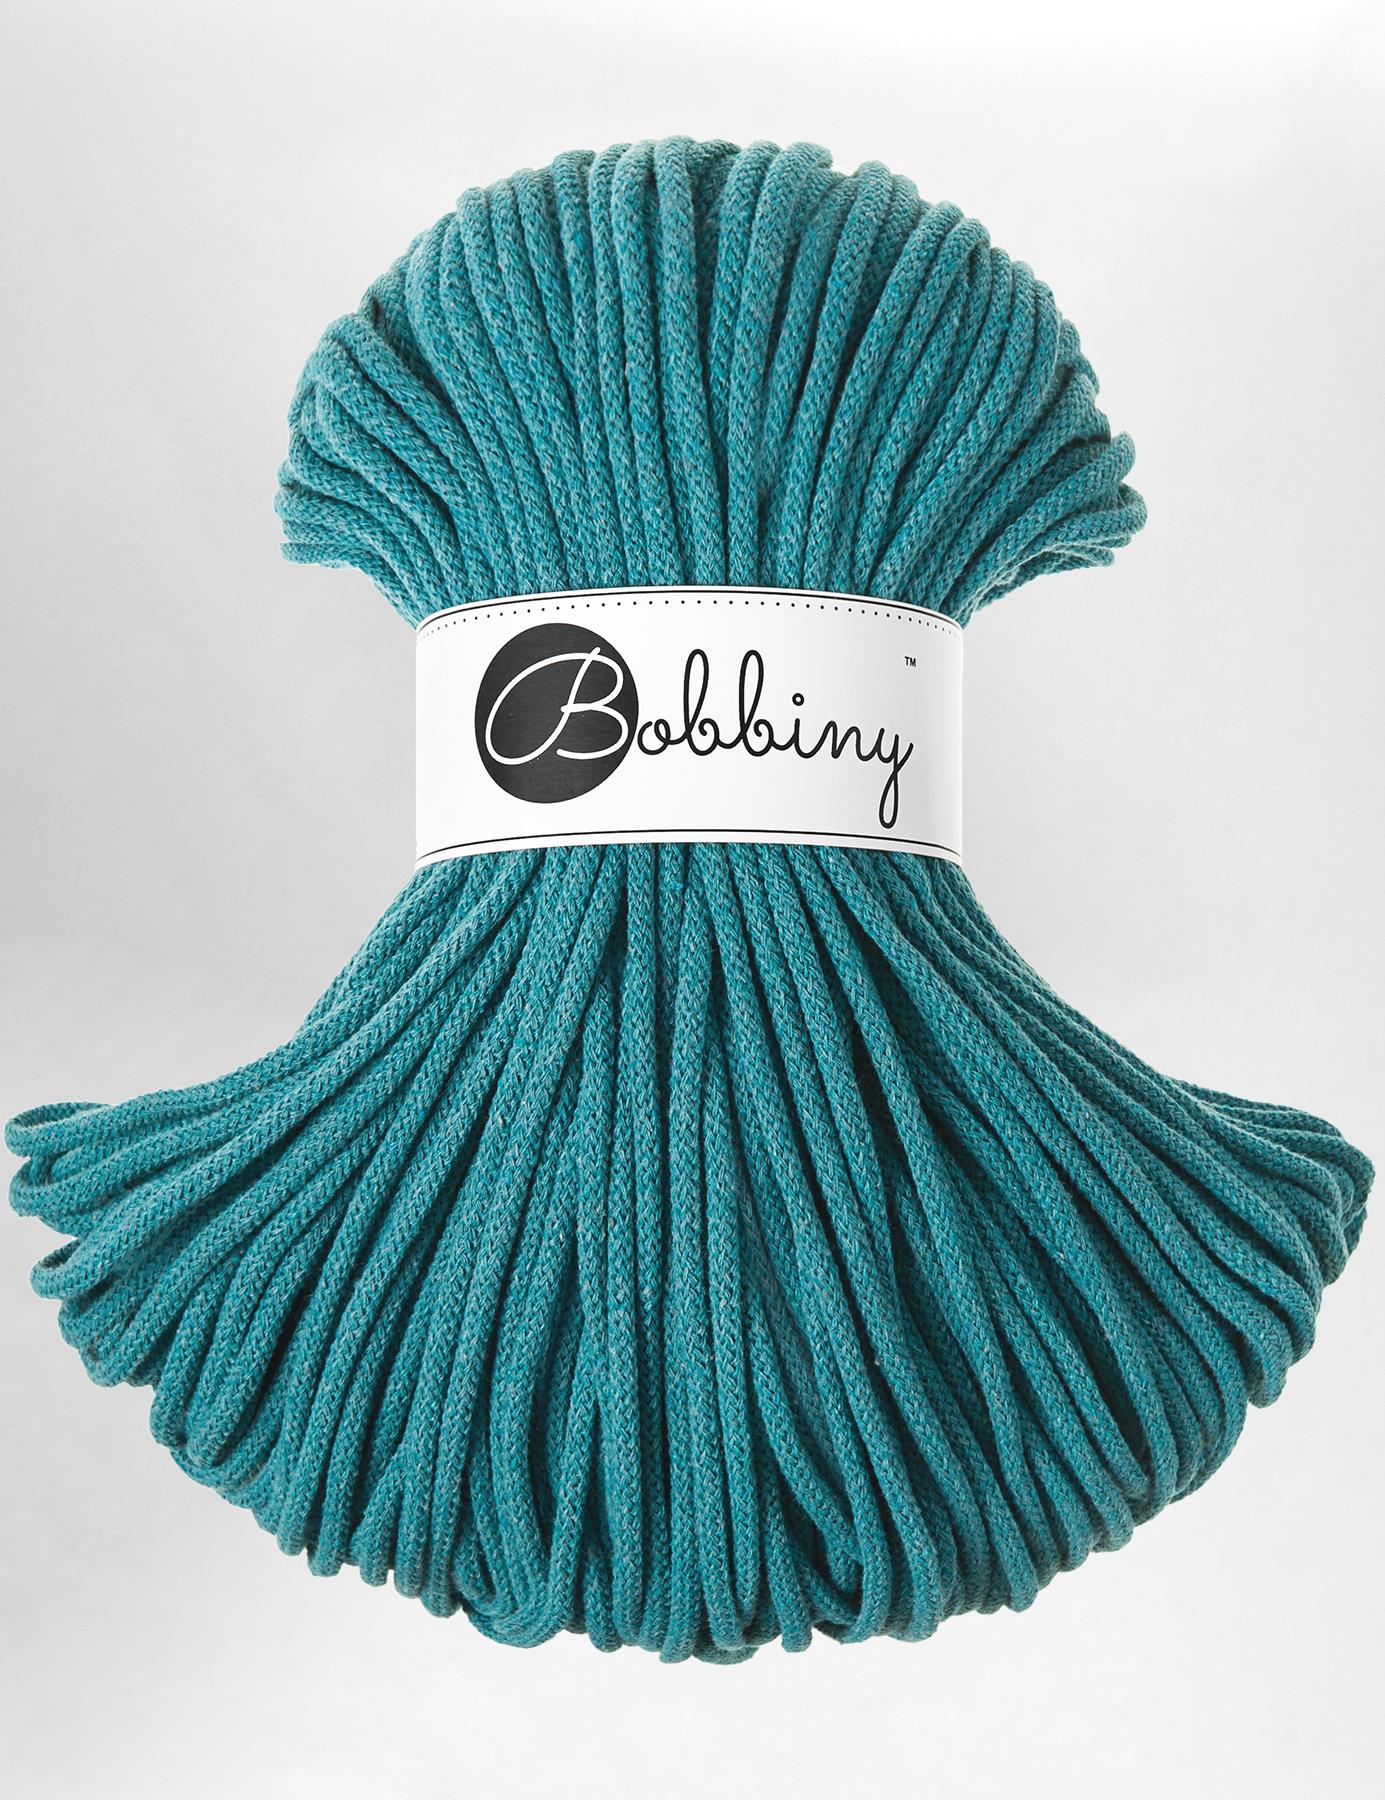 5mm Teal recycled cotton macrame cord by Bobbiny (100m)